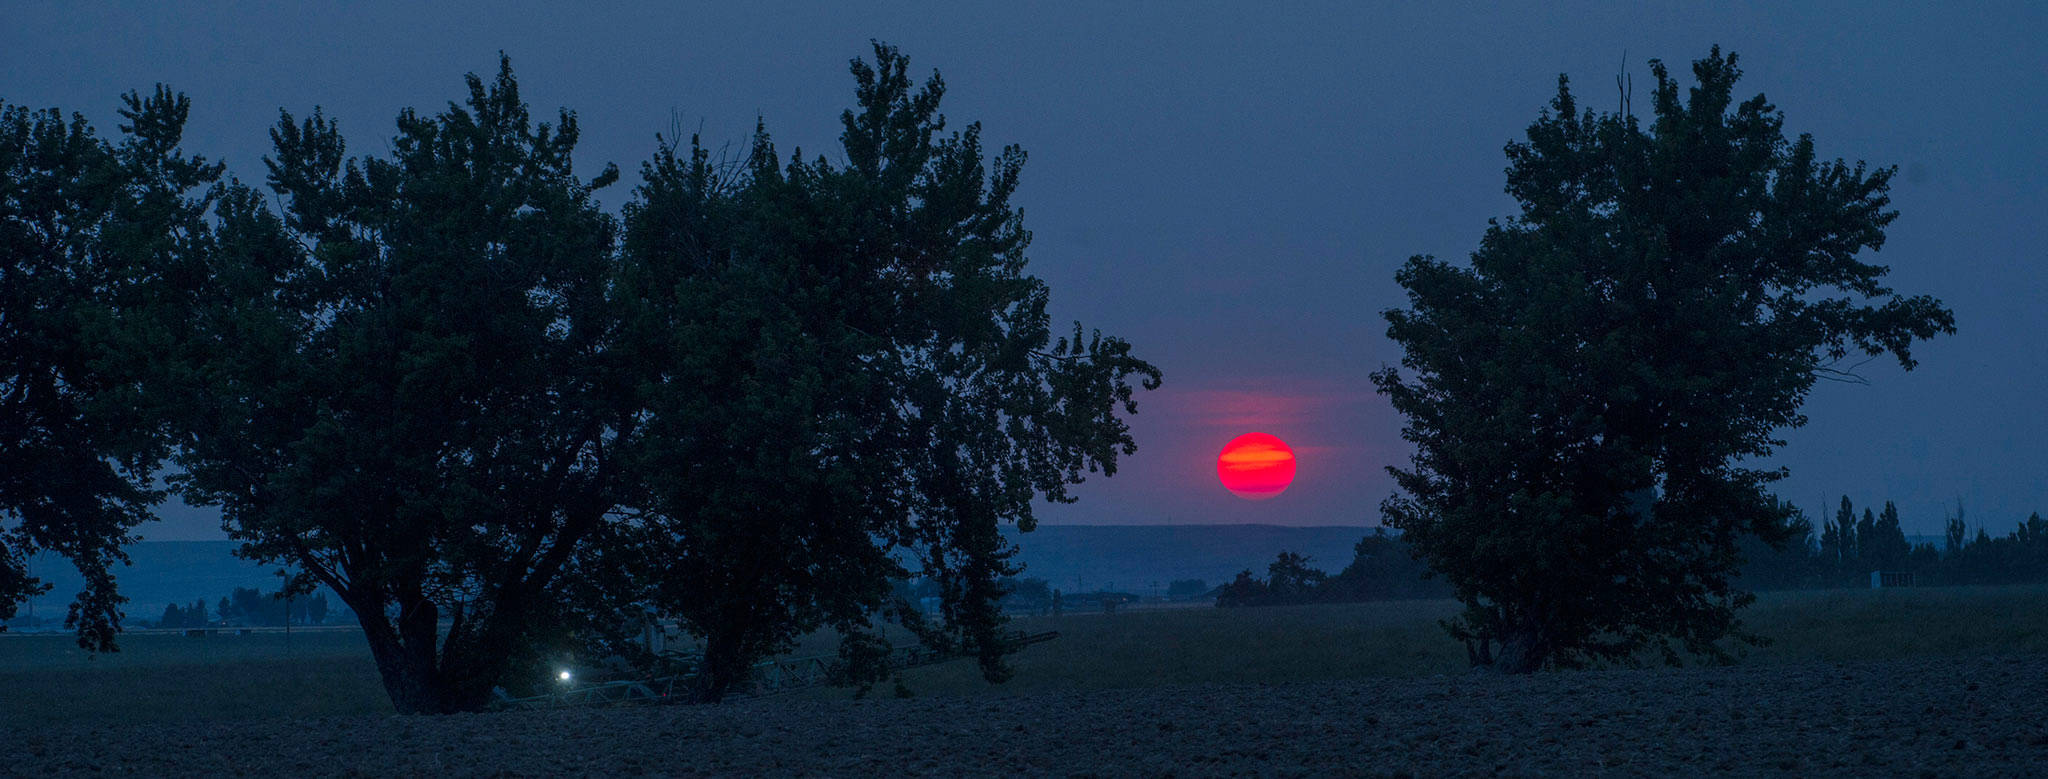 In this Monday photo, with a sky full of wildfire smoke and haze, the sun set bright red south of Touchet, Washington. (Greg Lehman/Walla Walla Union-Bulletin via AP)